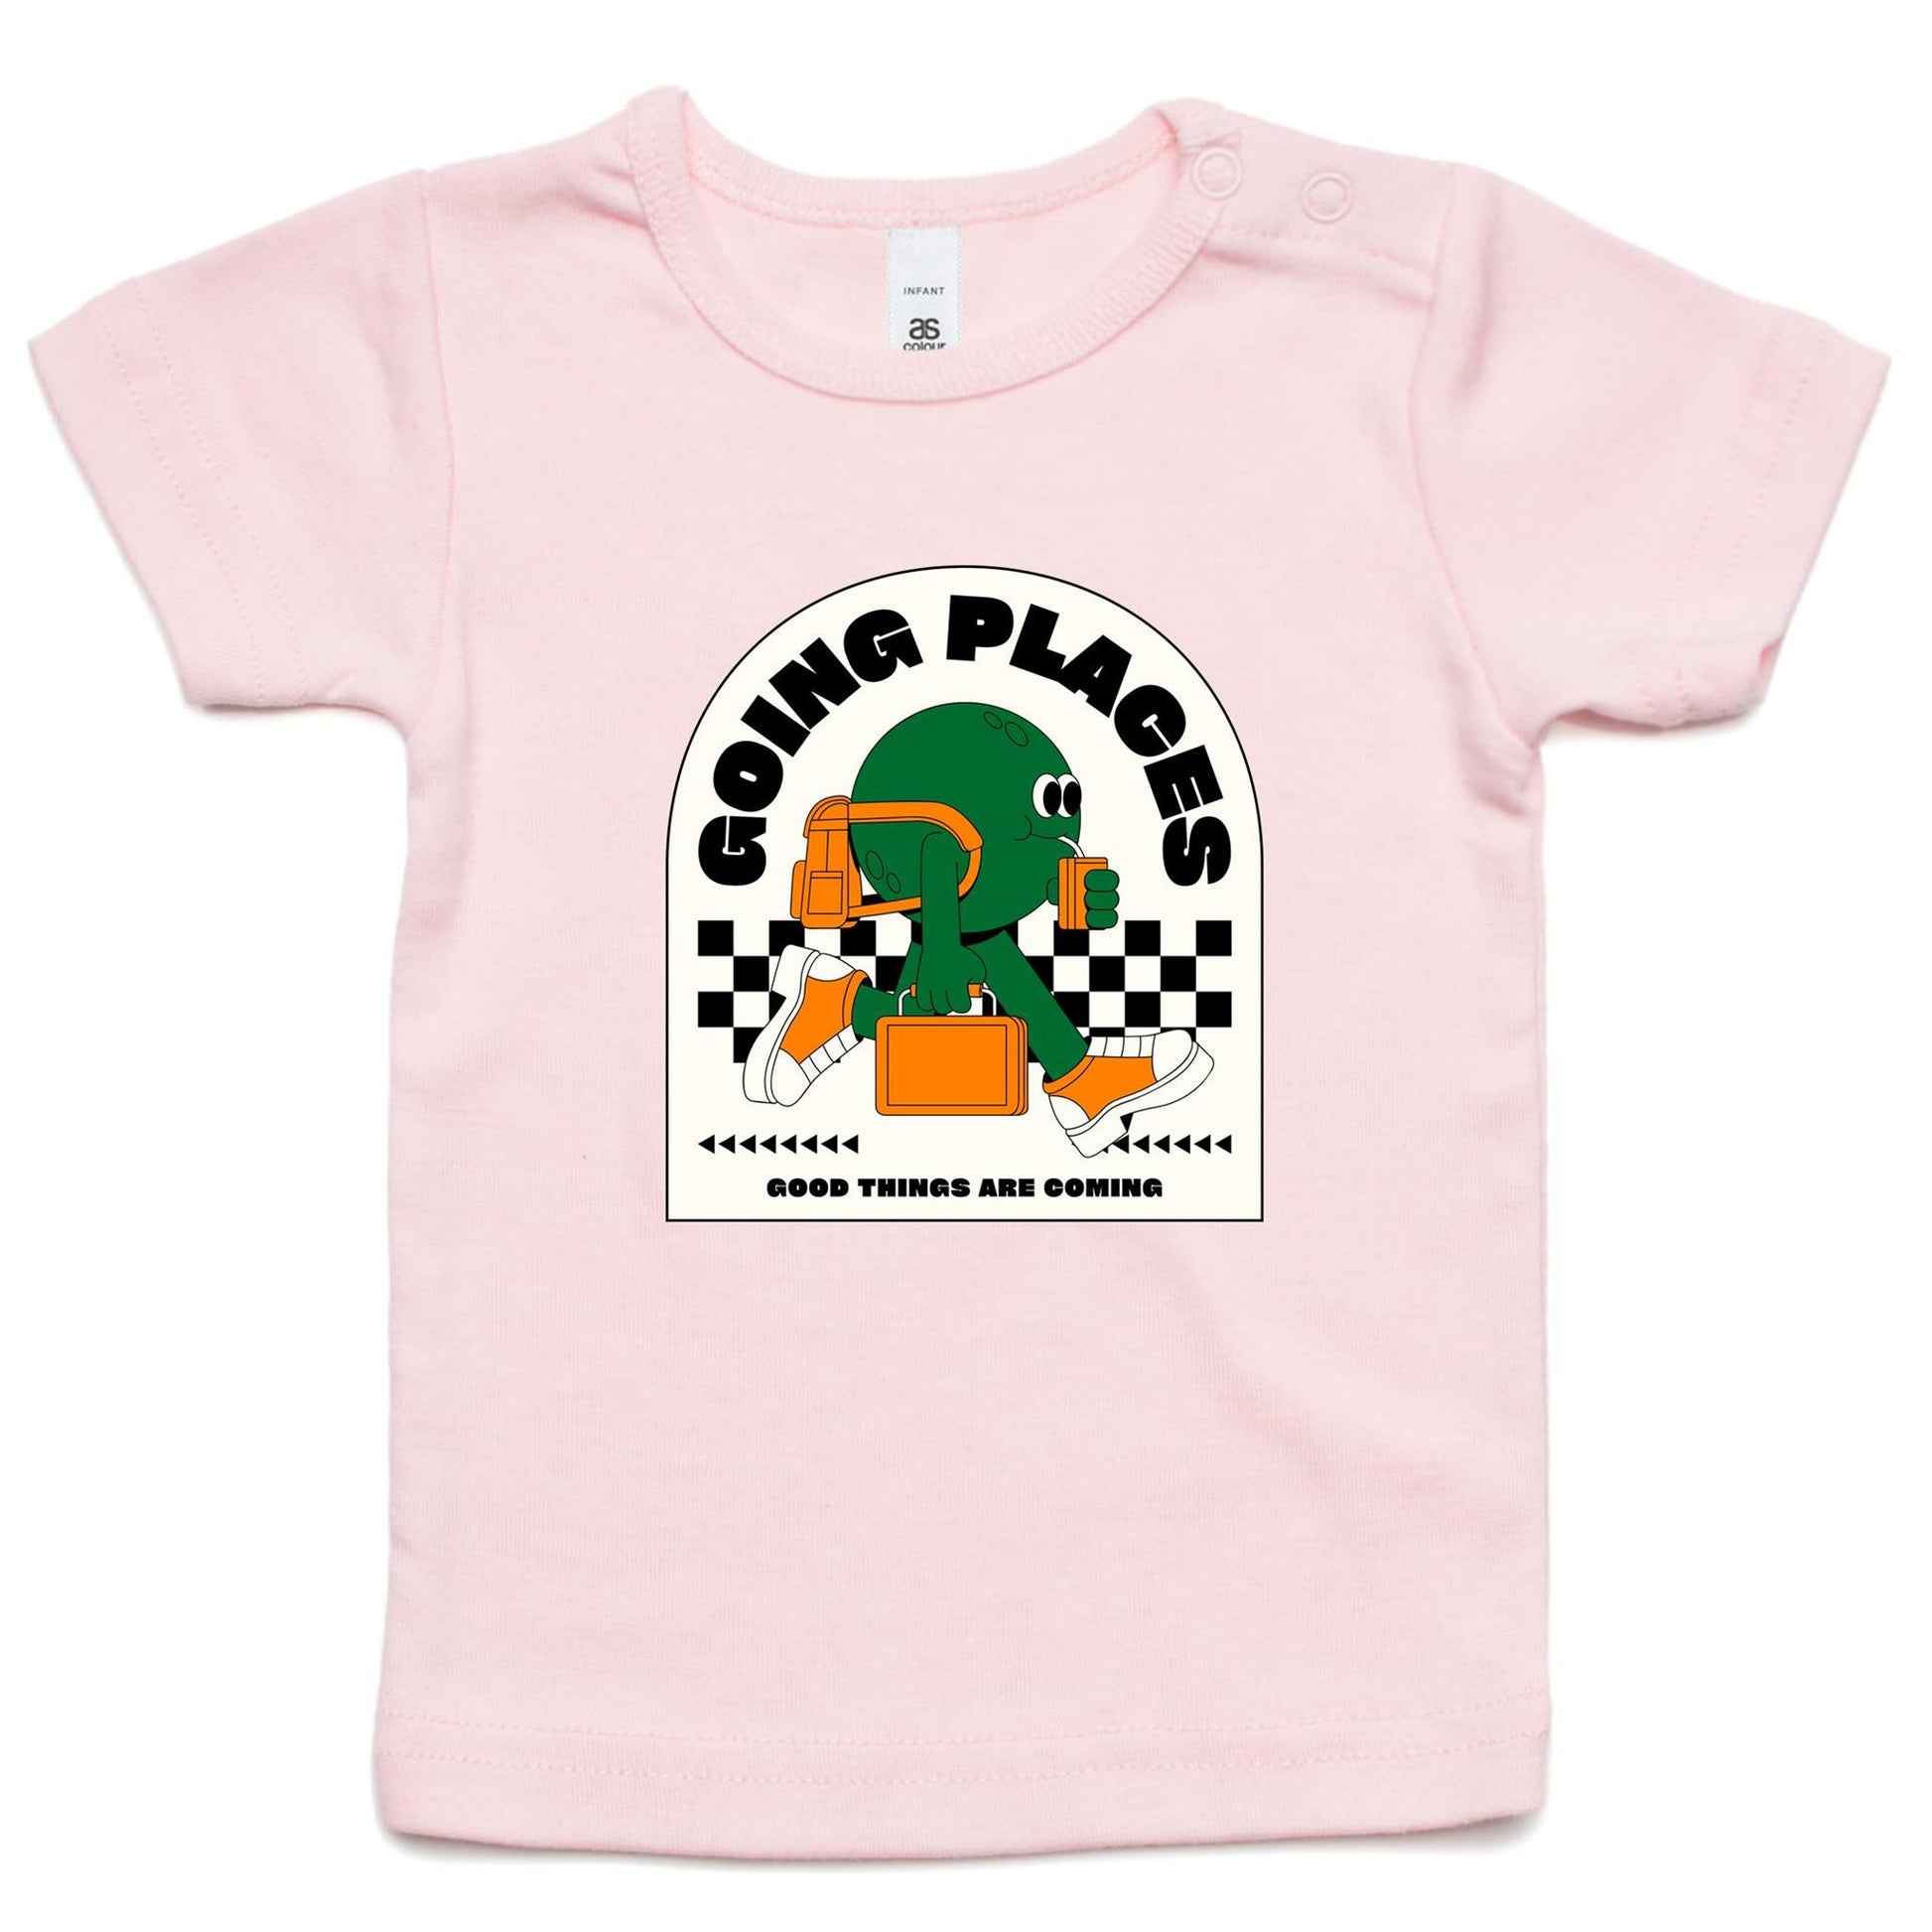 Going Places - Baby T-shirt Pink Baby T-shirt Retro